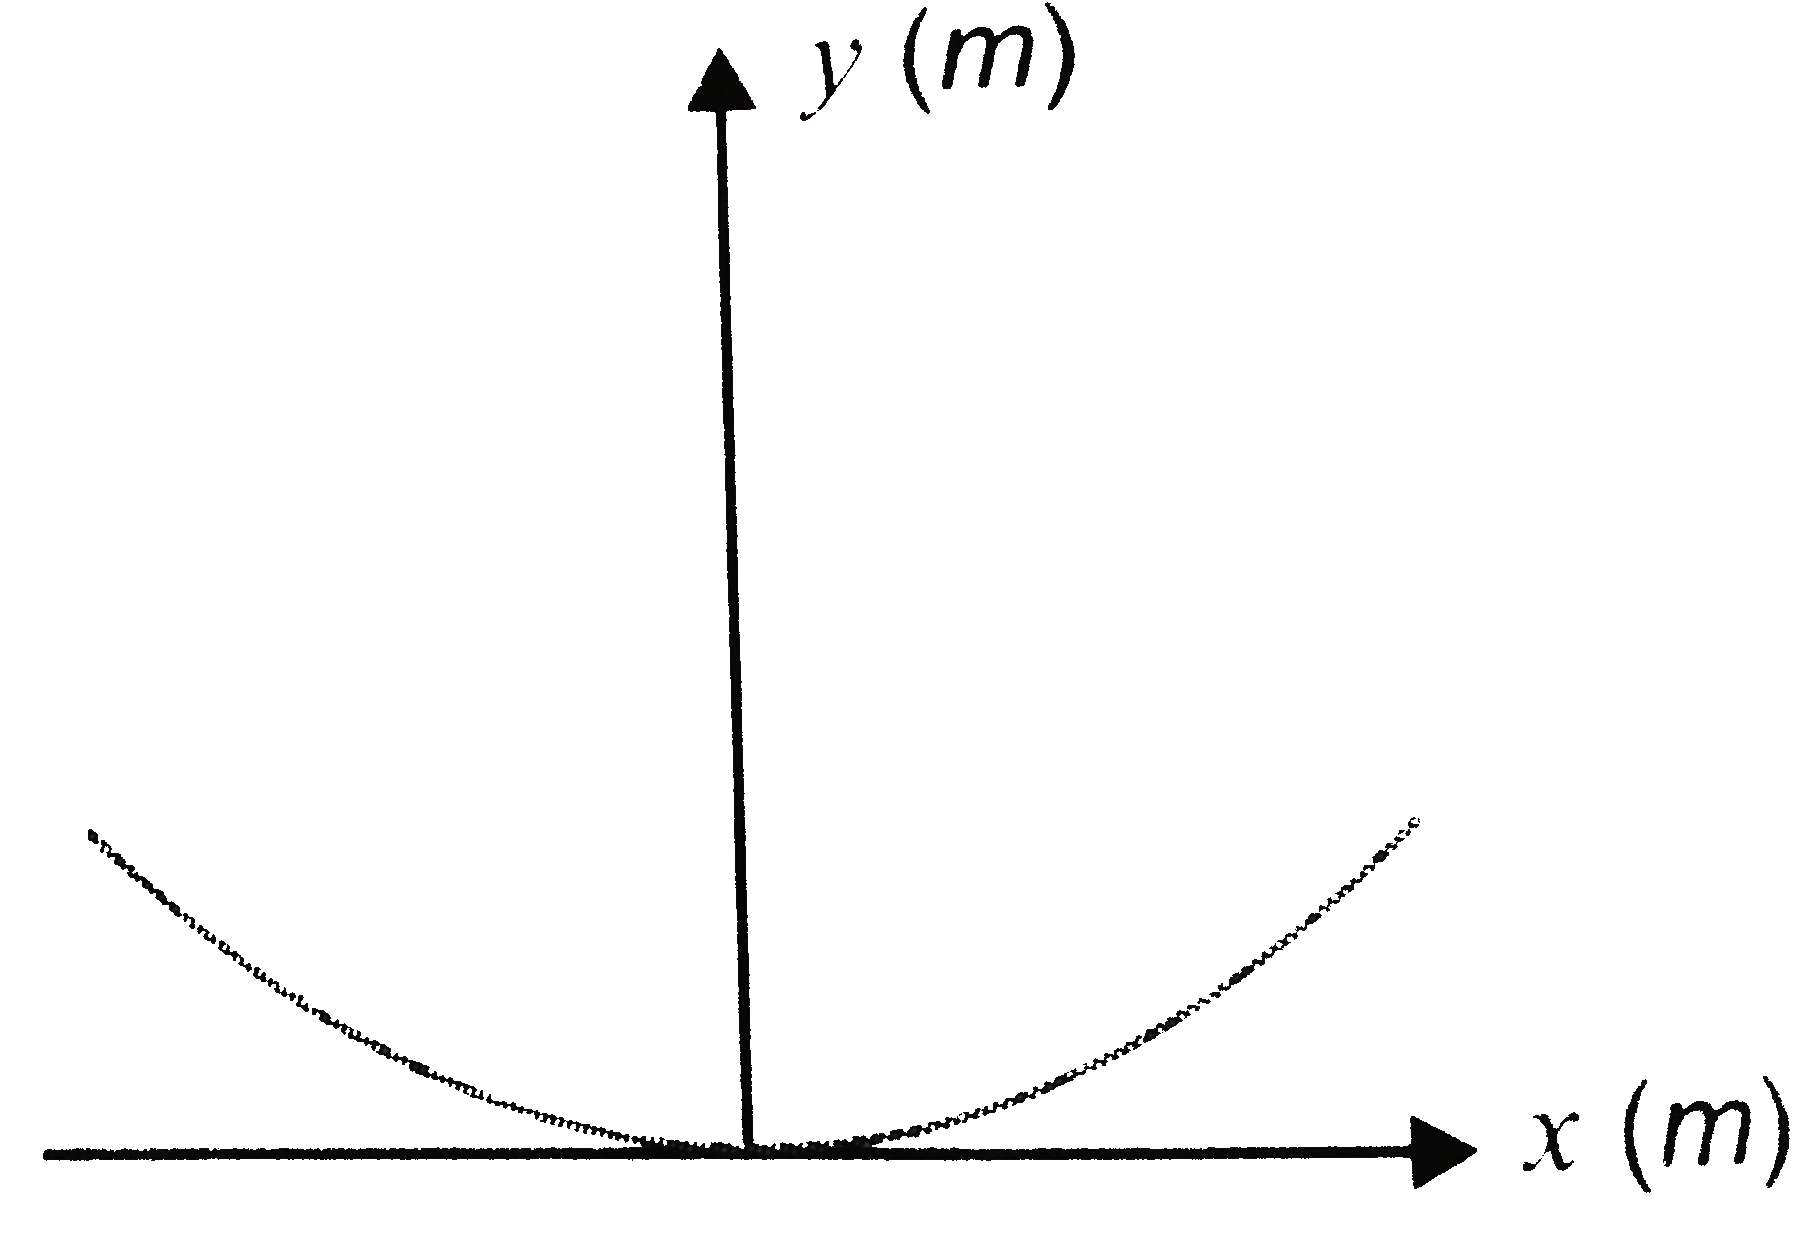 A parabolic bow1 with its bottom at origin has the shape y = (x^(2))/(20) where x and y are in metre The maximum height at which a small mass m can be placed on the bowl without slipping is (coeff of static friction 0.5    .